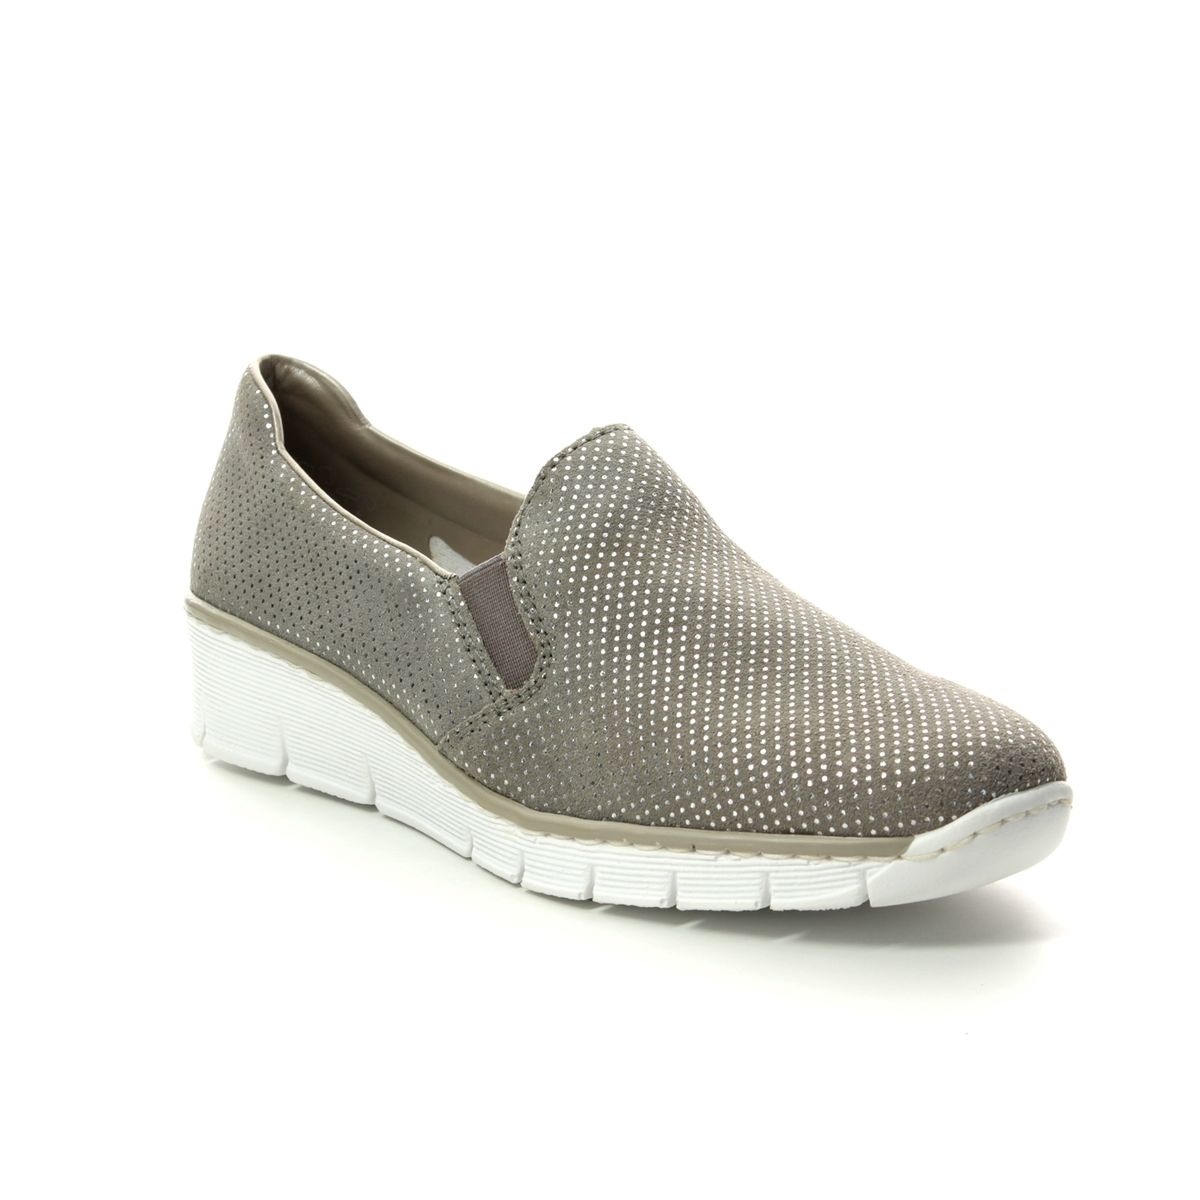 Rieker Bocciago Light Taupe Womens Comfort Slip On Shoes 53766-41 In Size 39 In Plain Light Taupe